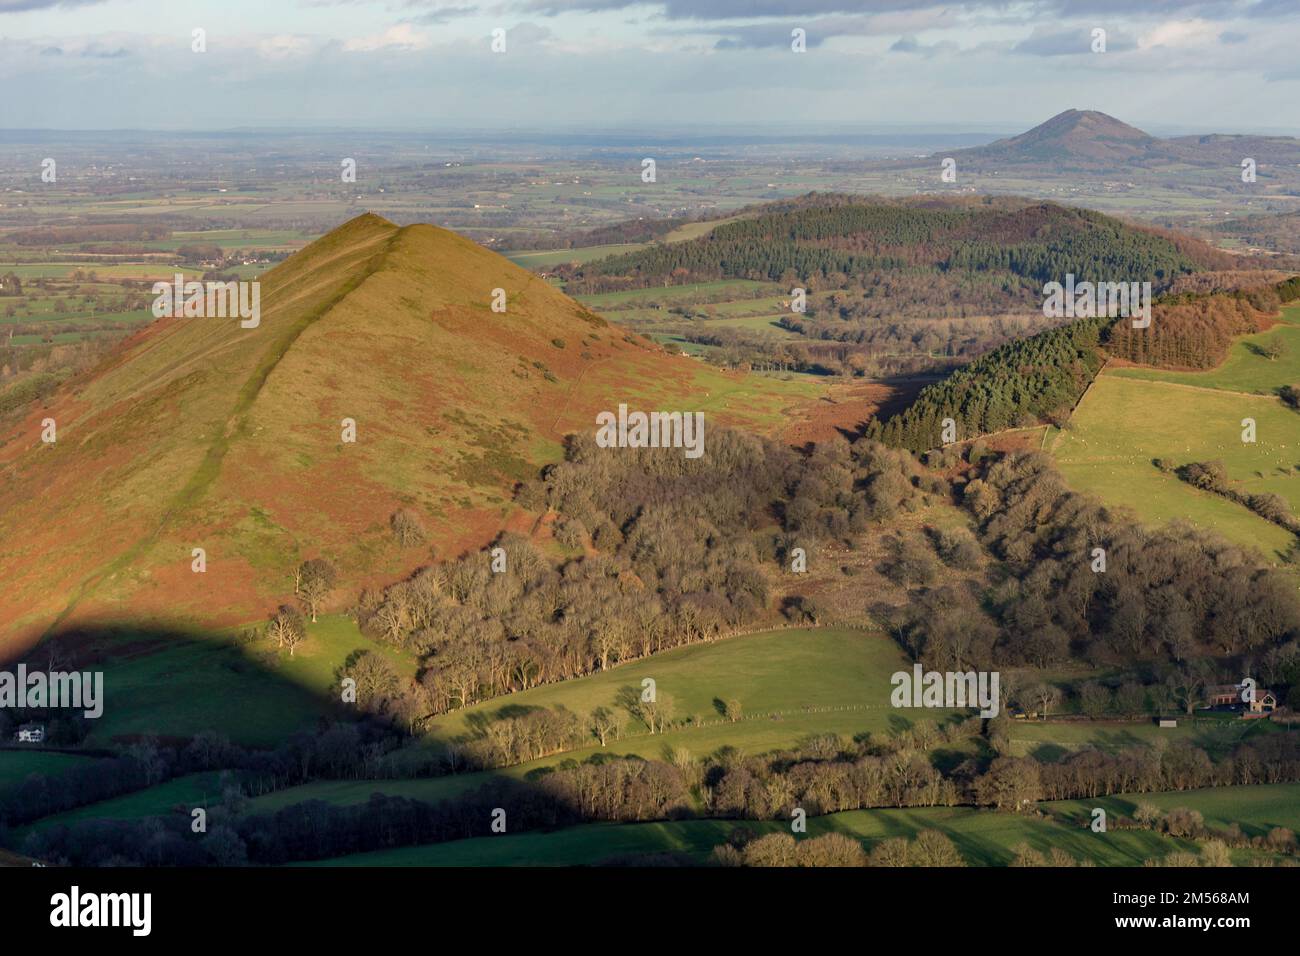 The Lawley, hill in Shropshire, England, with The Wrekin, another hill in the background. The shadow of Caer Caradoc in the forground. Stock Photo